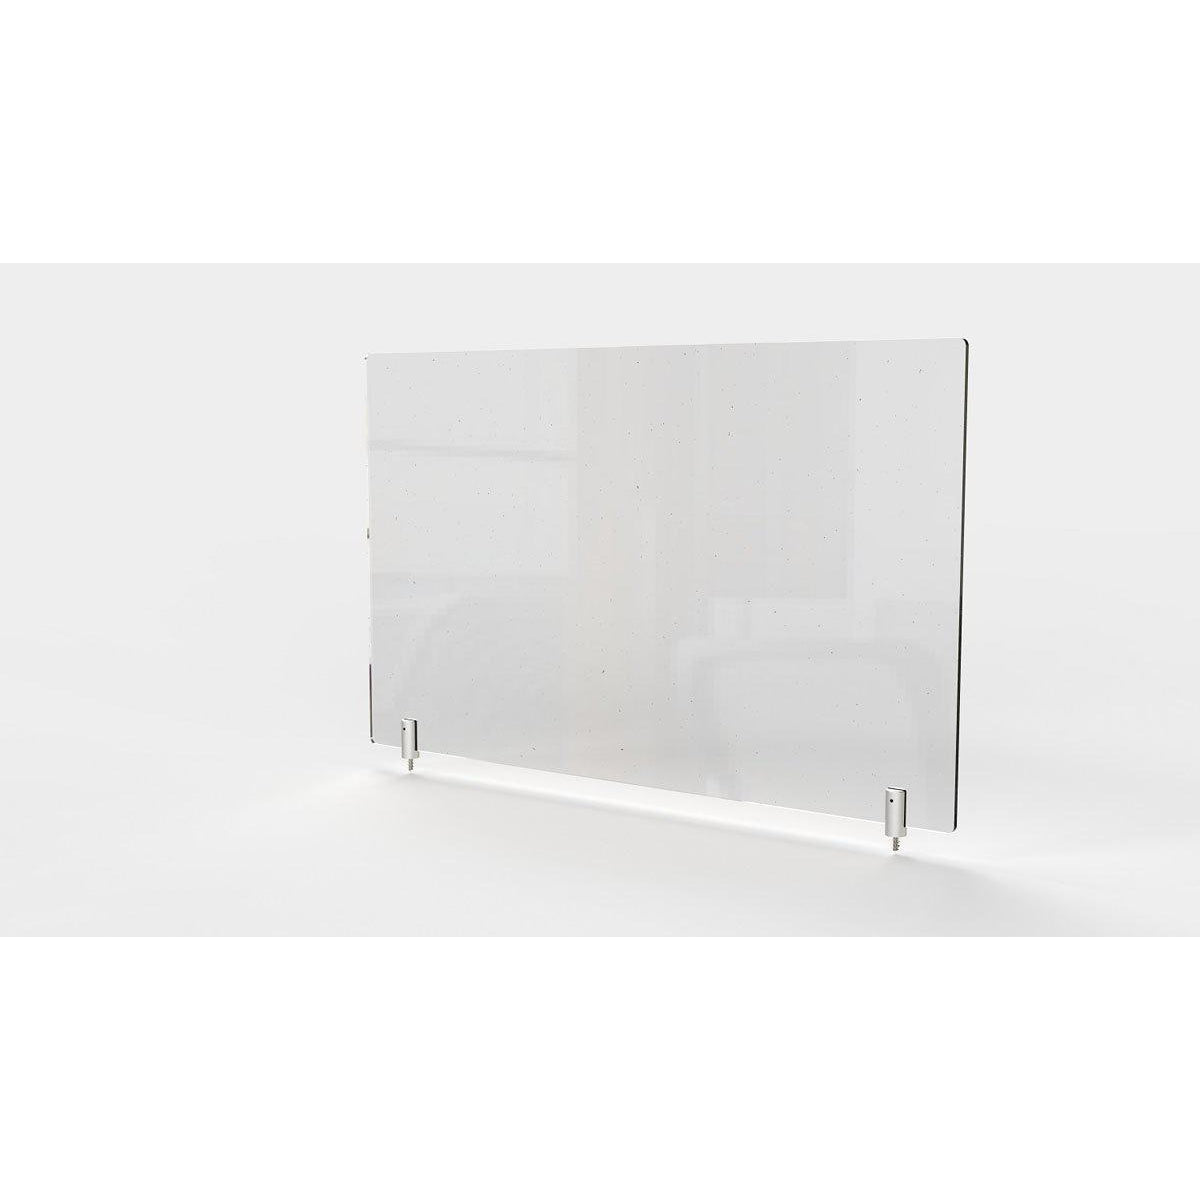 Clear Thermoplastic Partition & Cubicle Extender with Permanent Screw Attachment, 24"H x 24"W